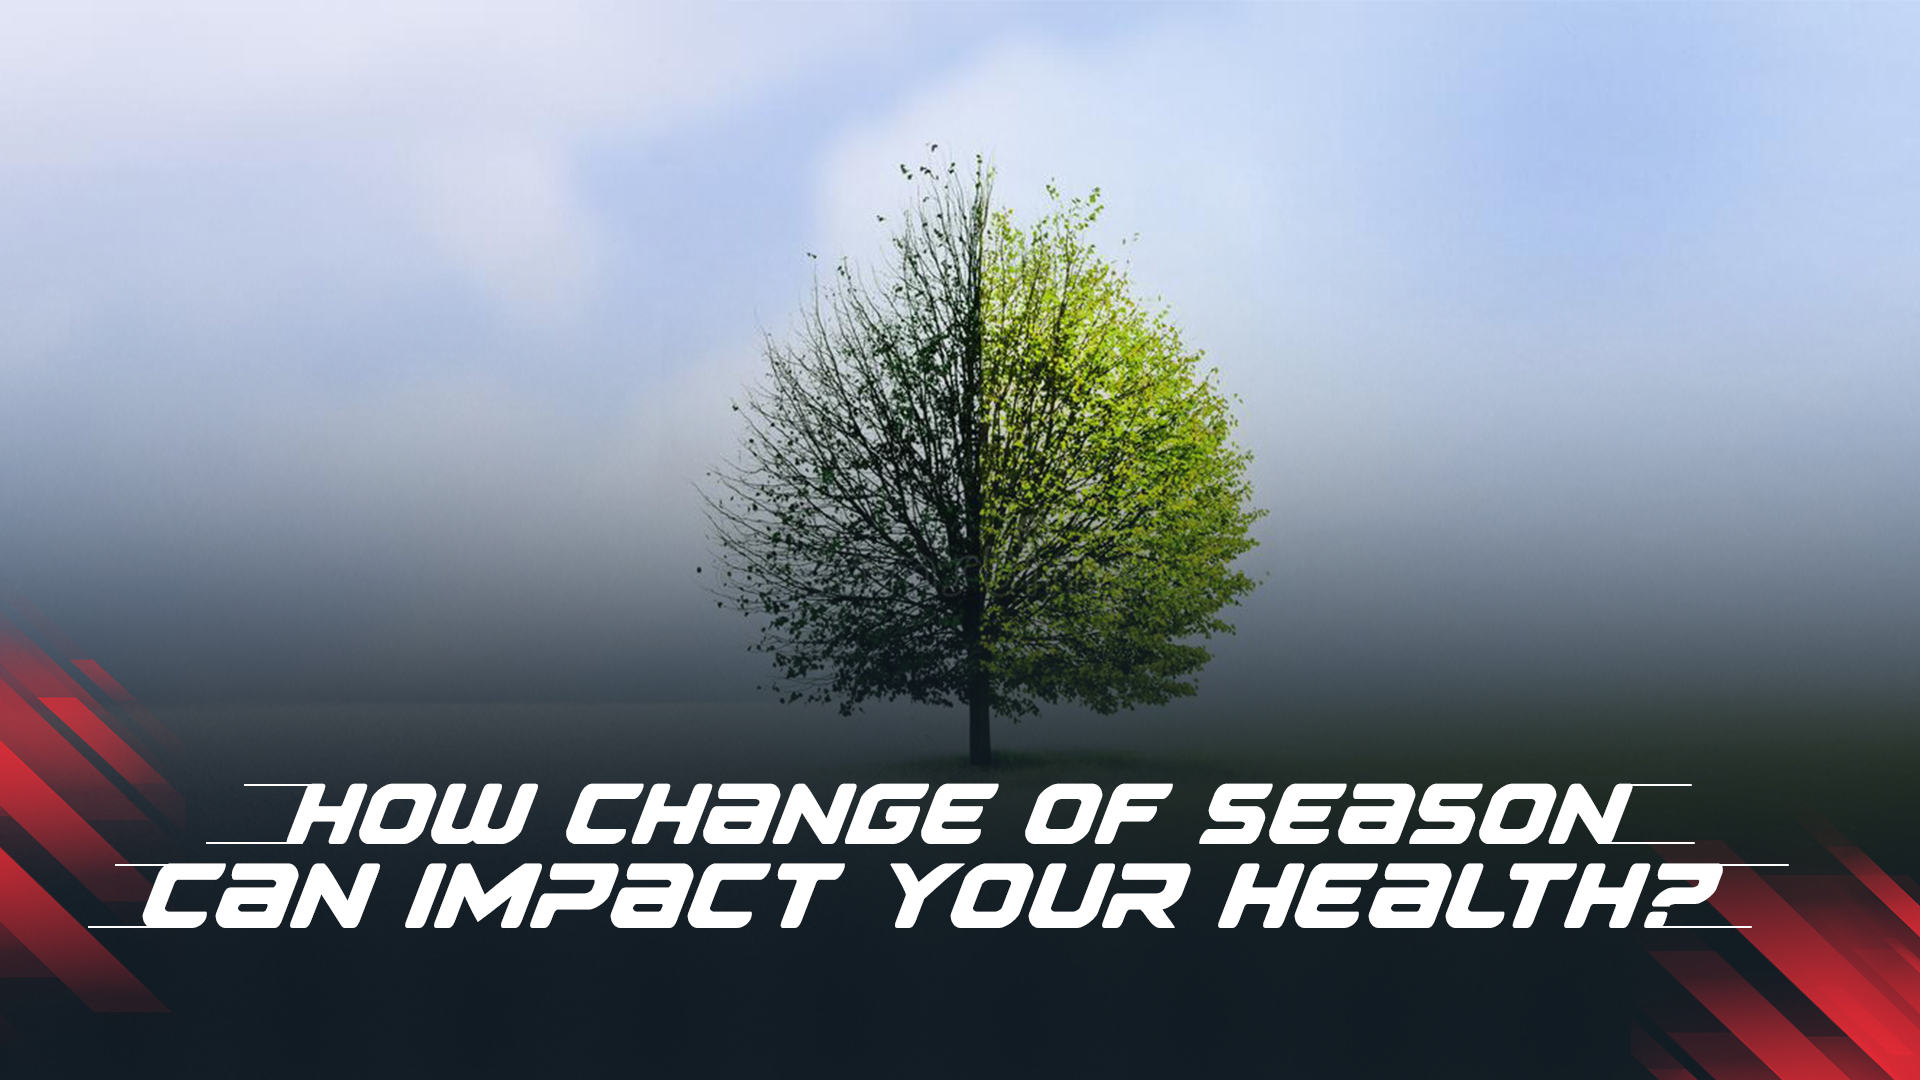 How Can The Change Of Season Impact Your Health